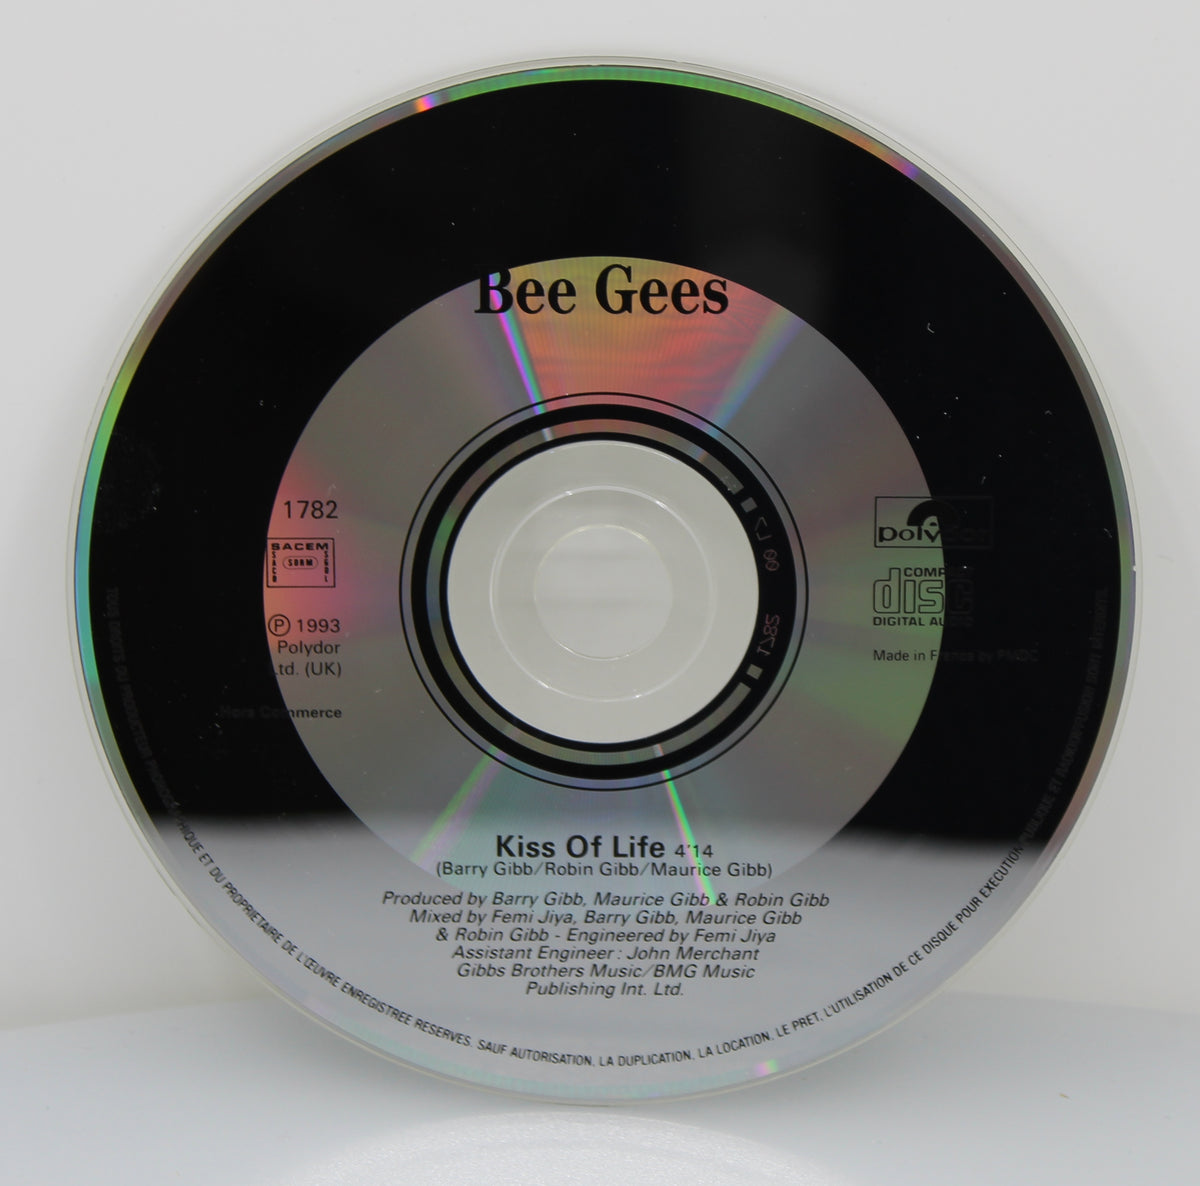 Bee Gees - Kiss Of Life, CD, Single, Promo, France 1993